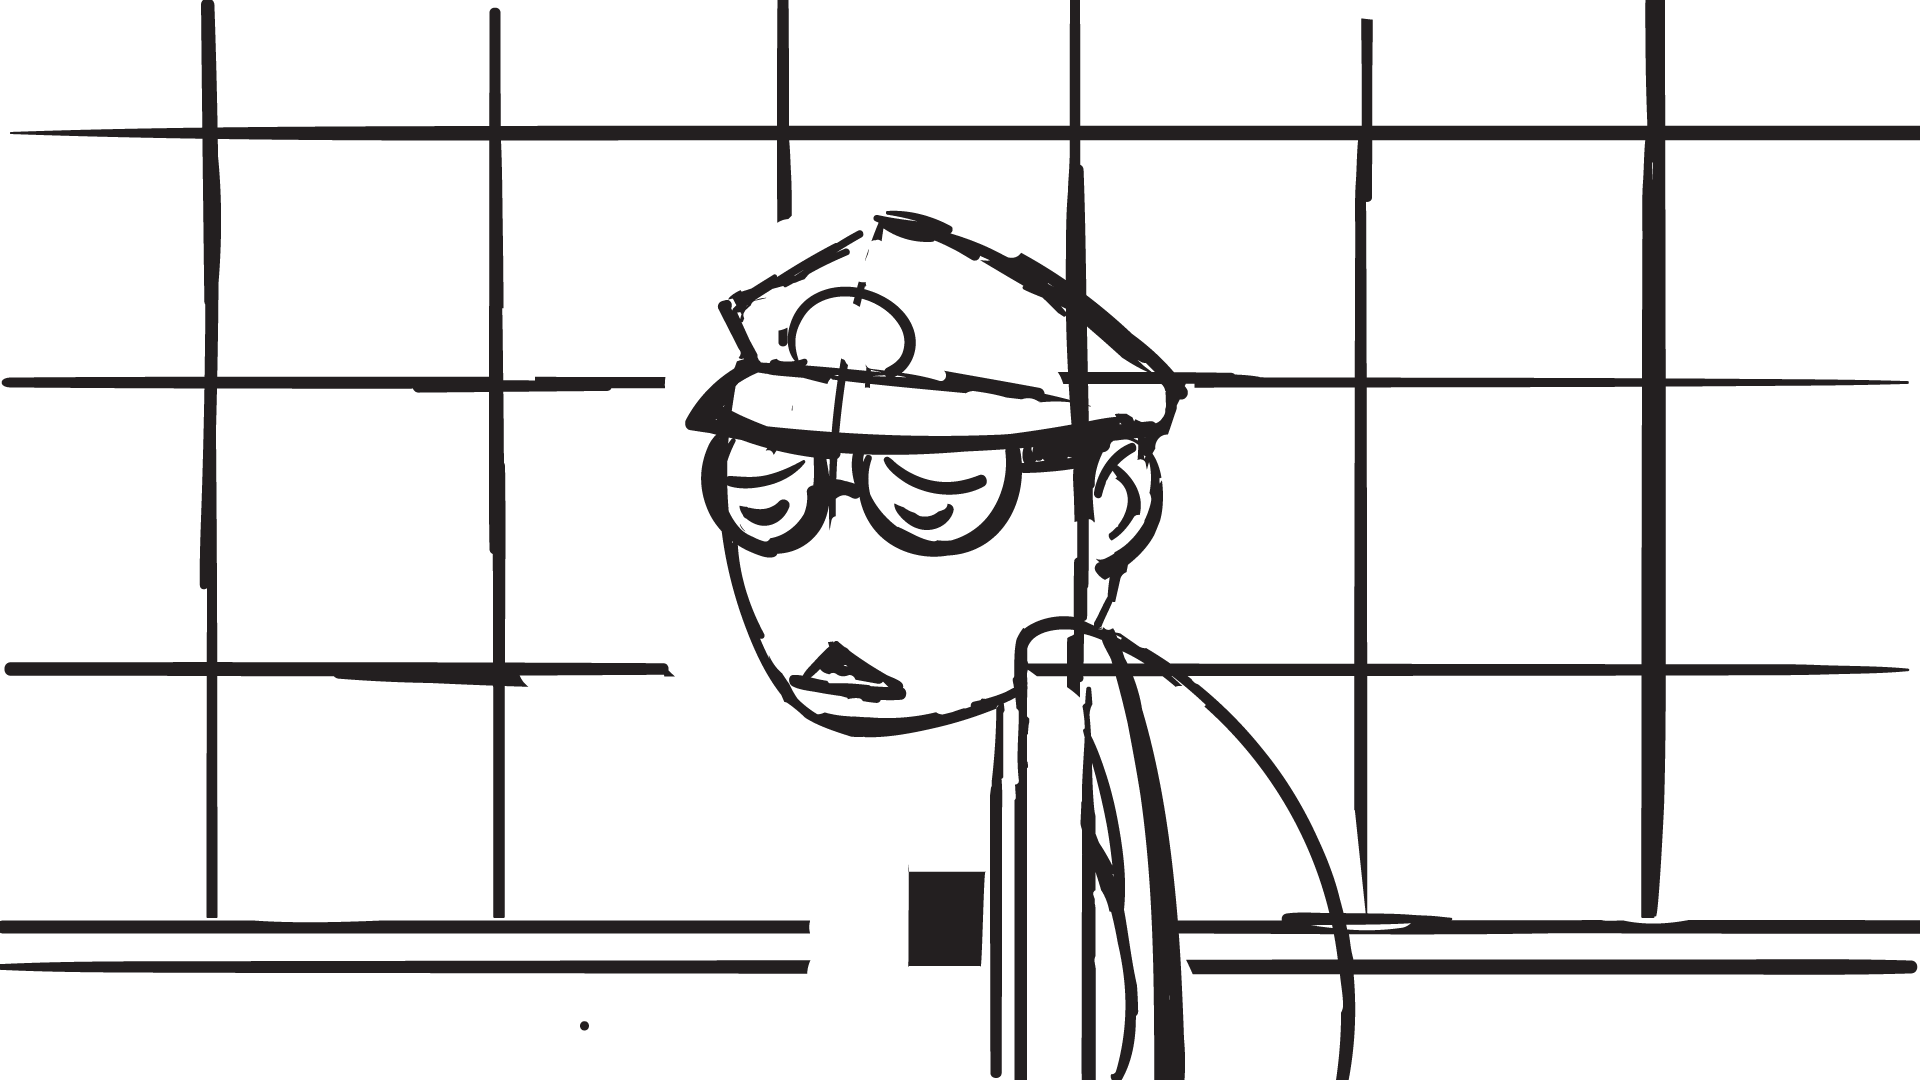   Pre-production sketch of Markus with mailboxes background  